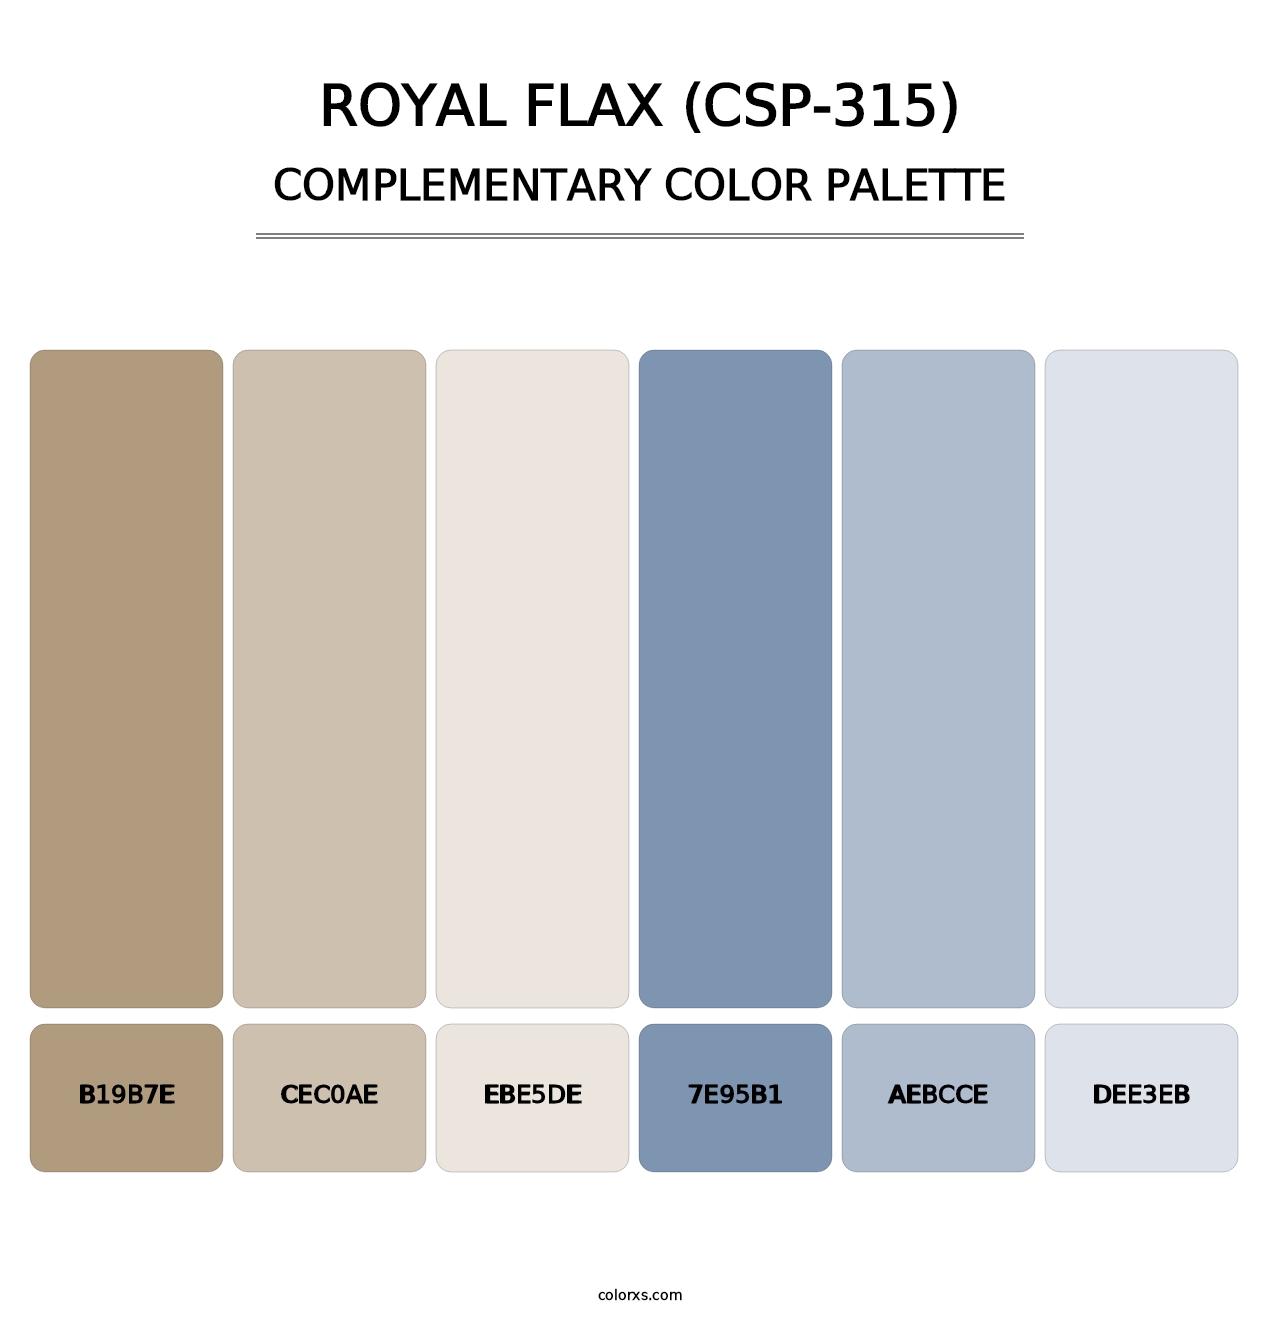 Royal Flax (CSP-315) - Complementary Color Palette